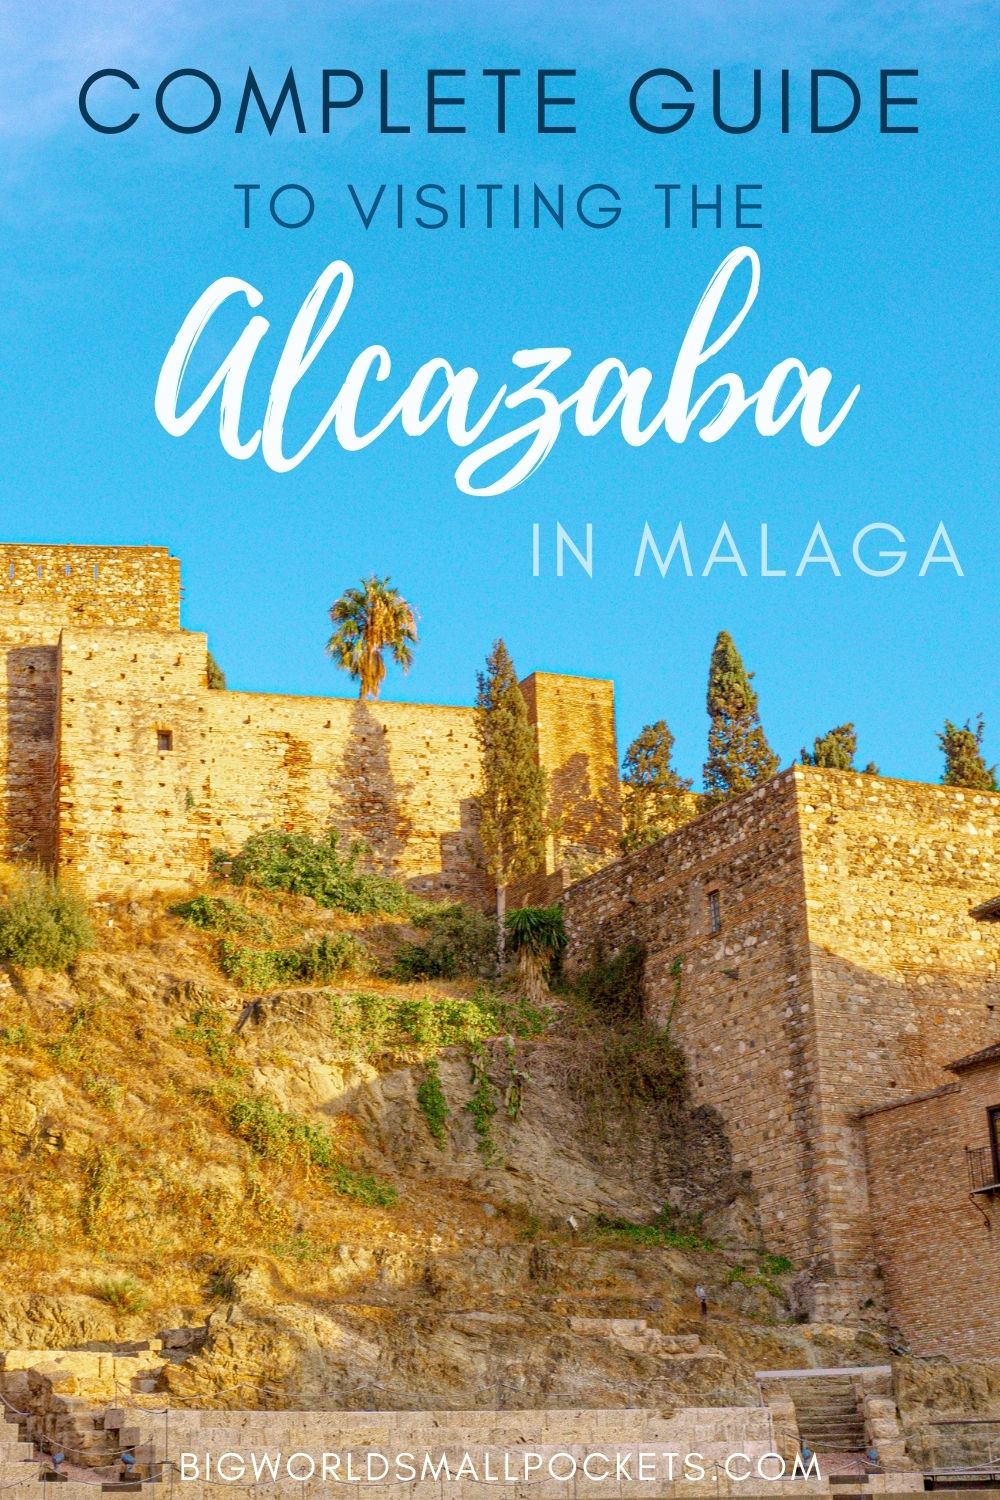 Complete Guide to Visiting the Alcazaba in Malaga, Spain